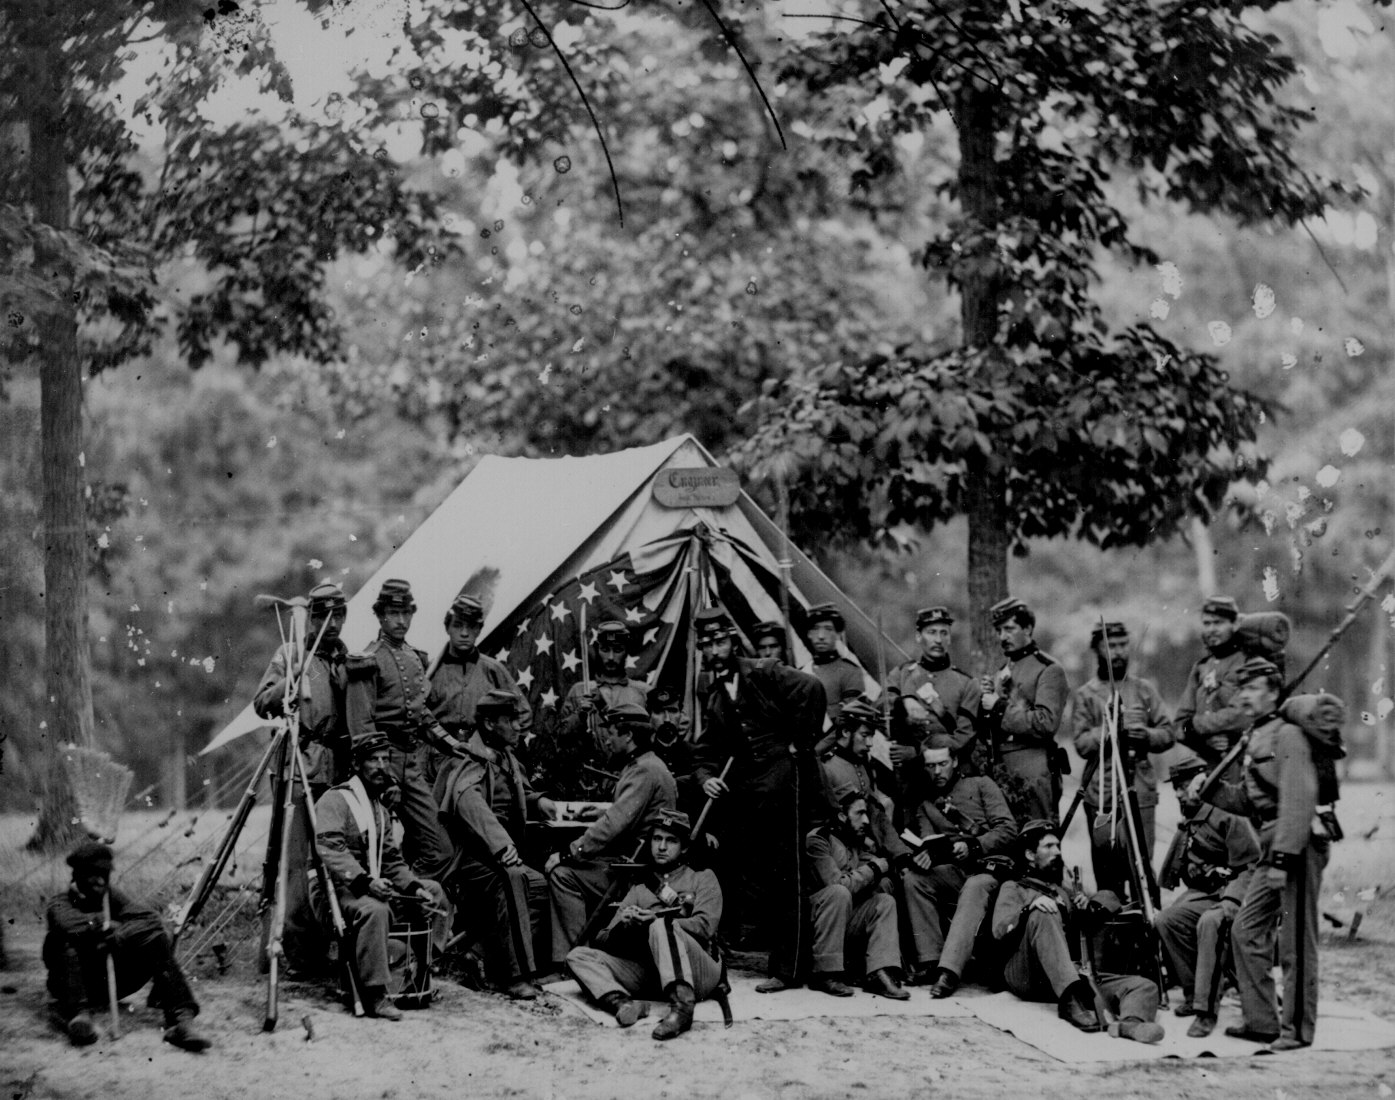 Pictures of the Civil War